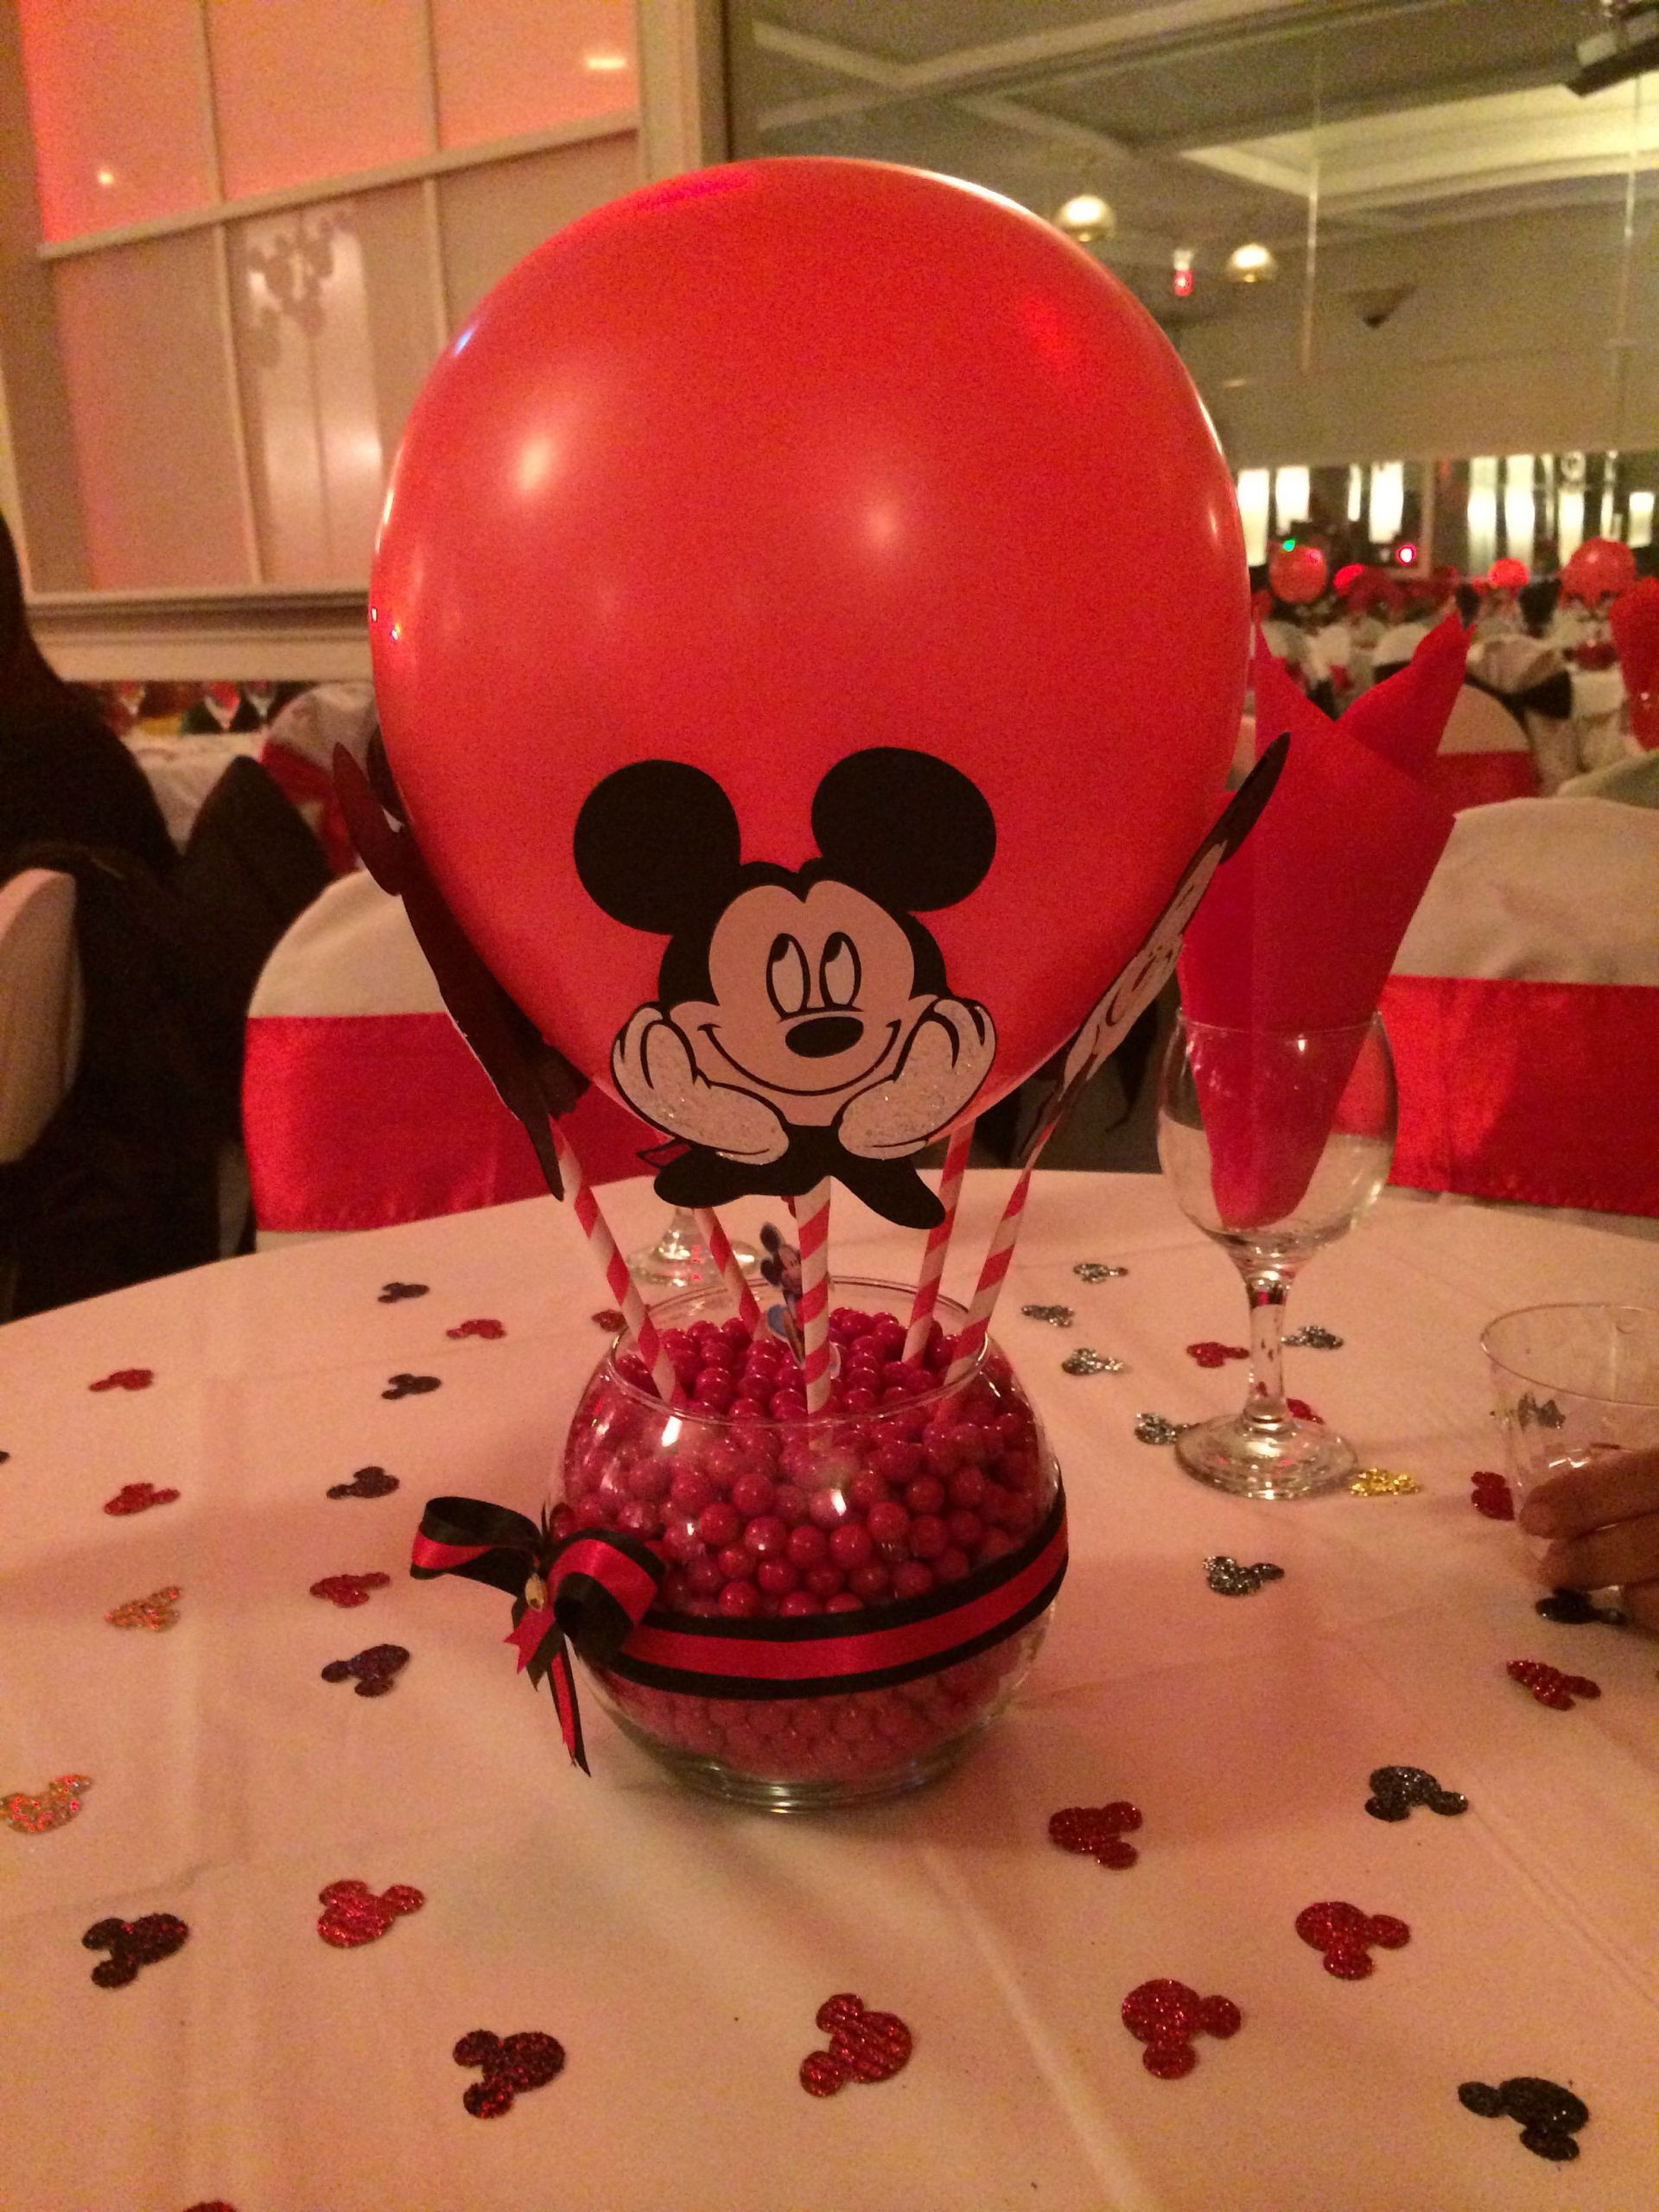 DIY Mickey Mouse Decorations
 DIY Mickey Mouse centerpiece With images